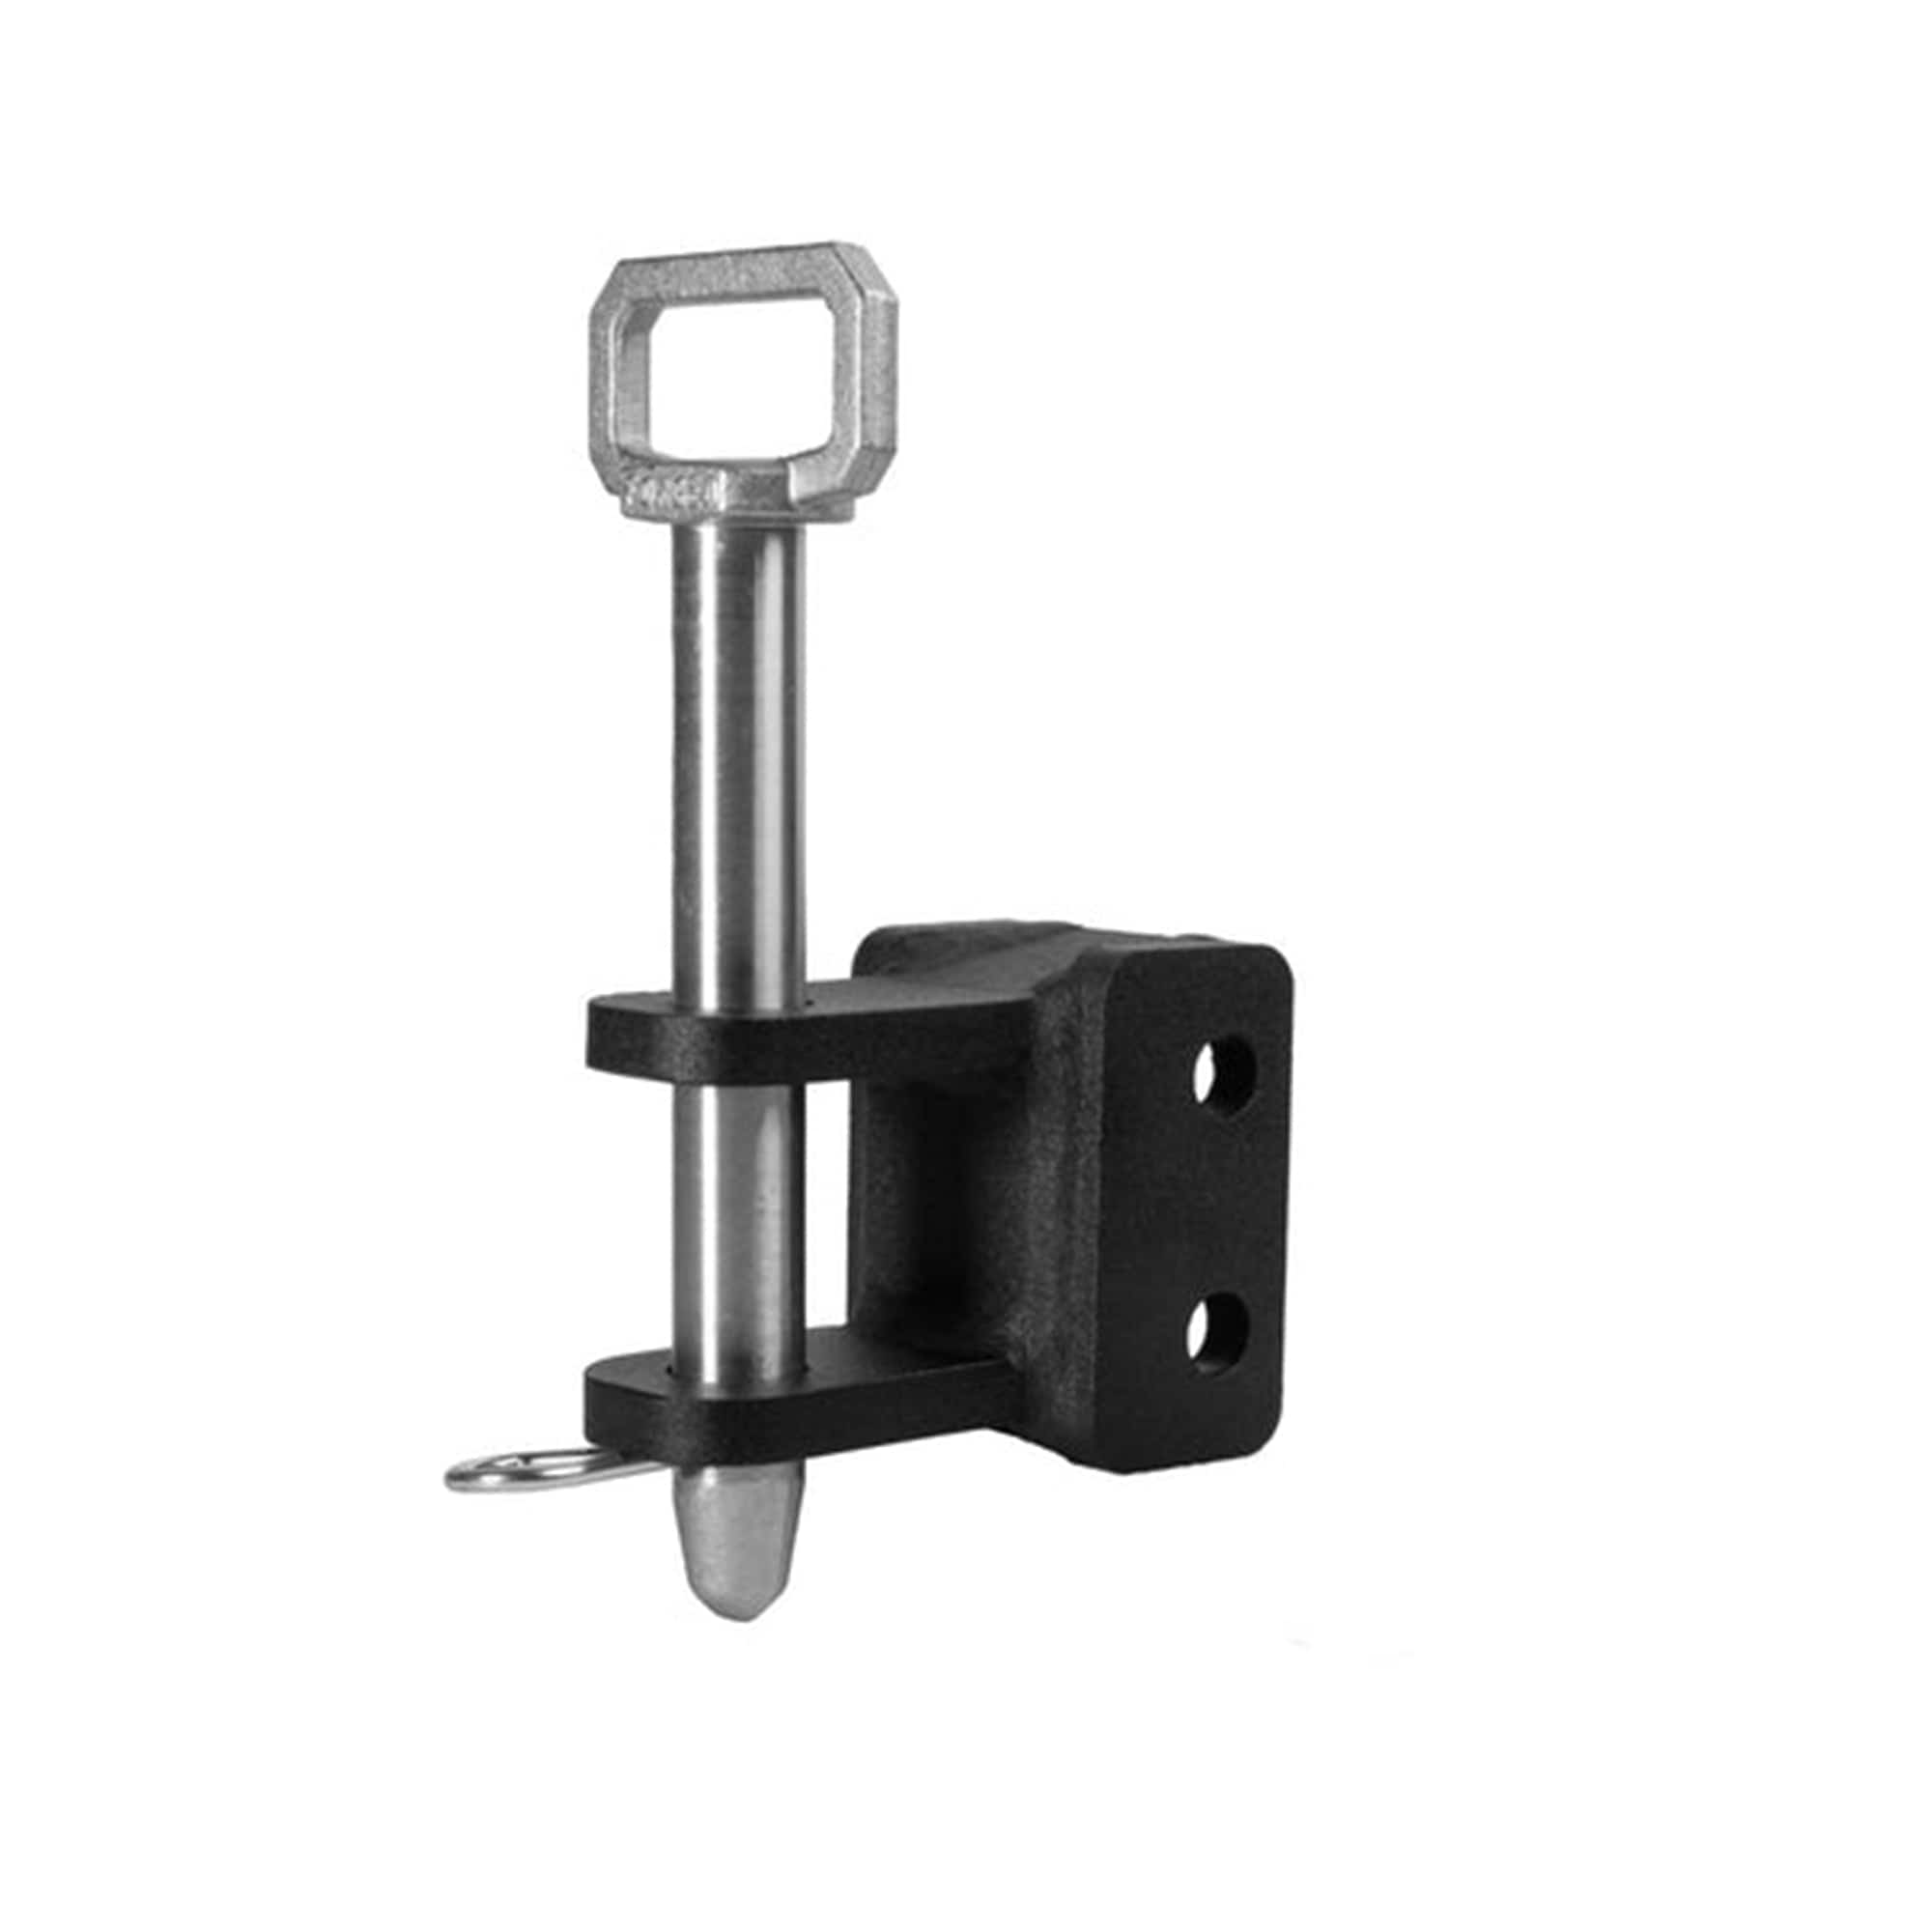 Bulletproof Hitches MD2TANG Medium Duty 2-Tang Clevis Hitch Attachment W/ 1" Pin